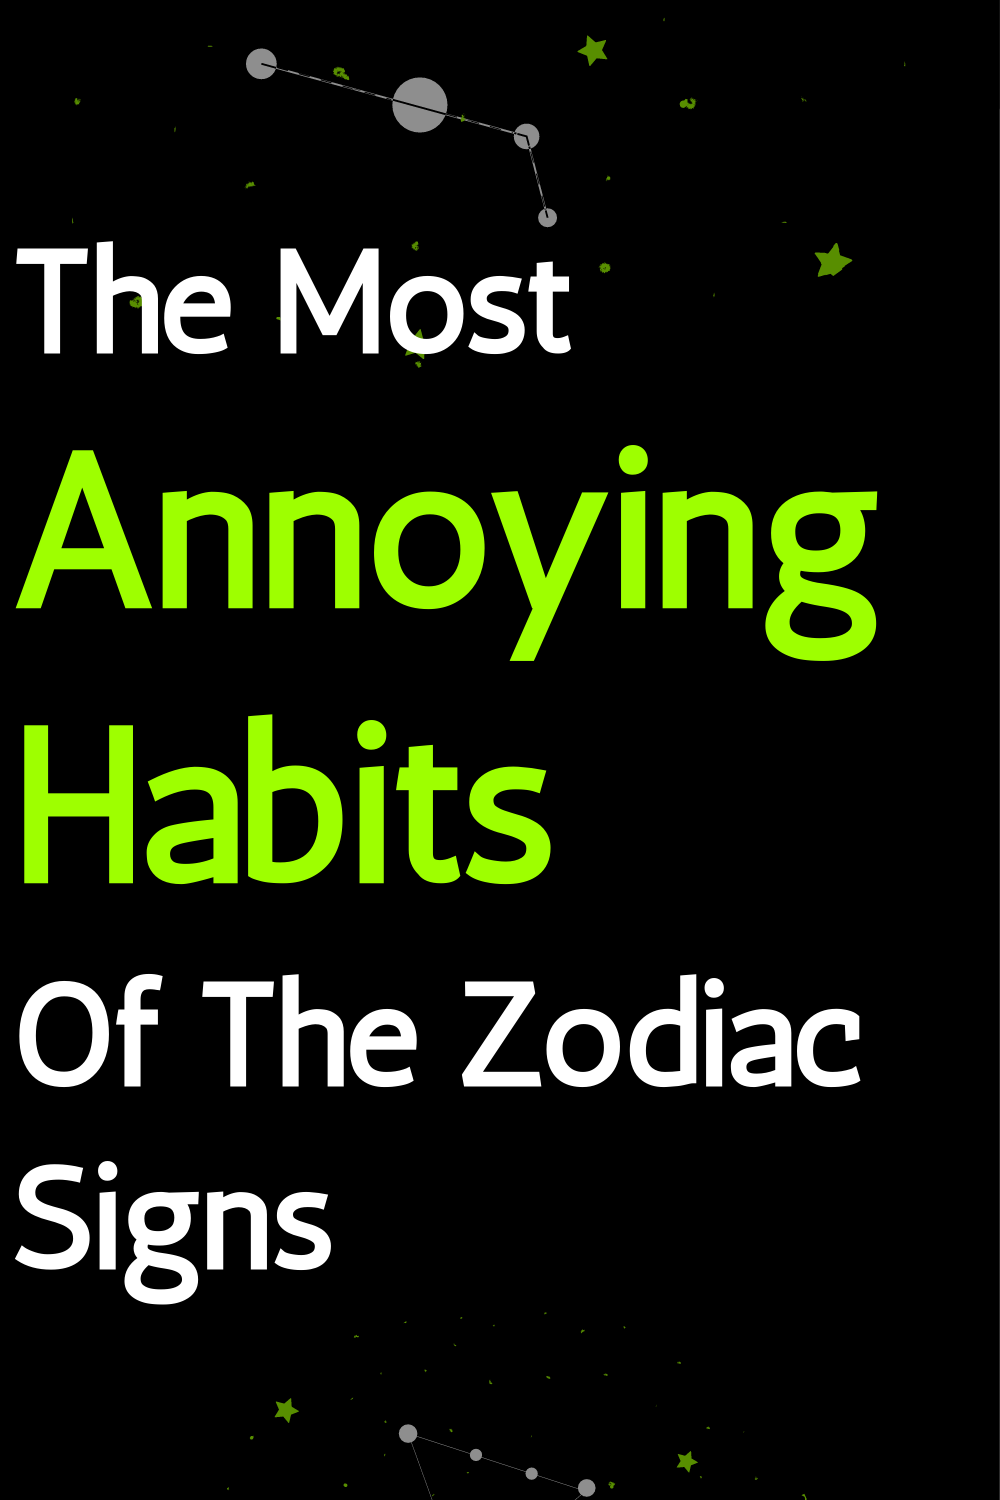 The Most Annoying Habits Of The Zodiac Signs